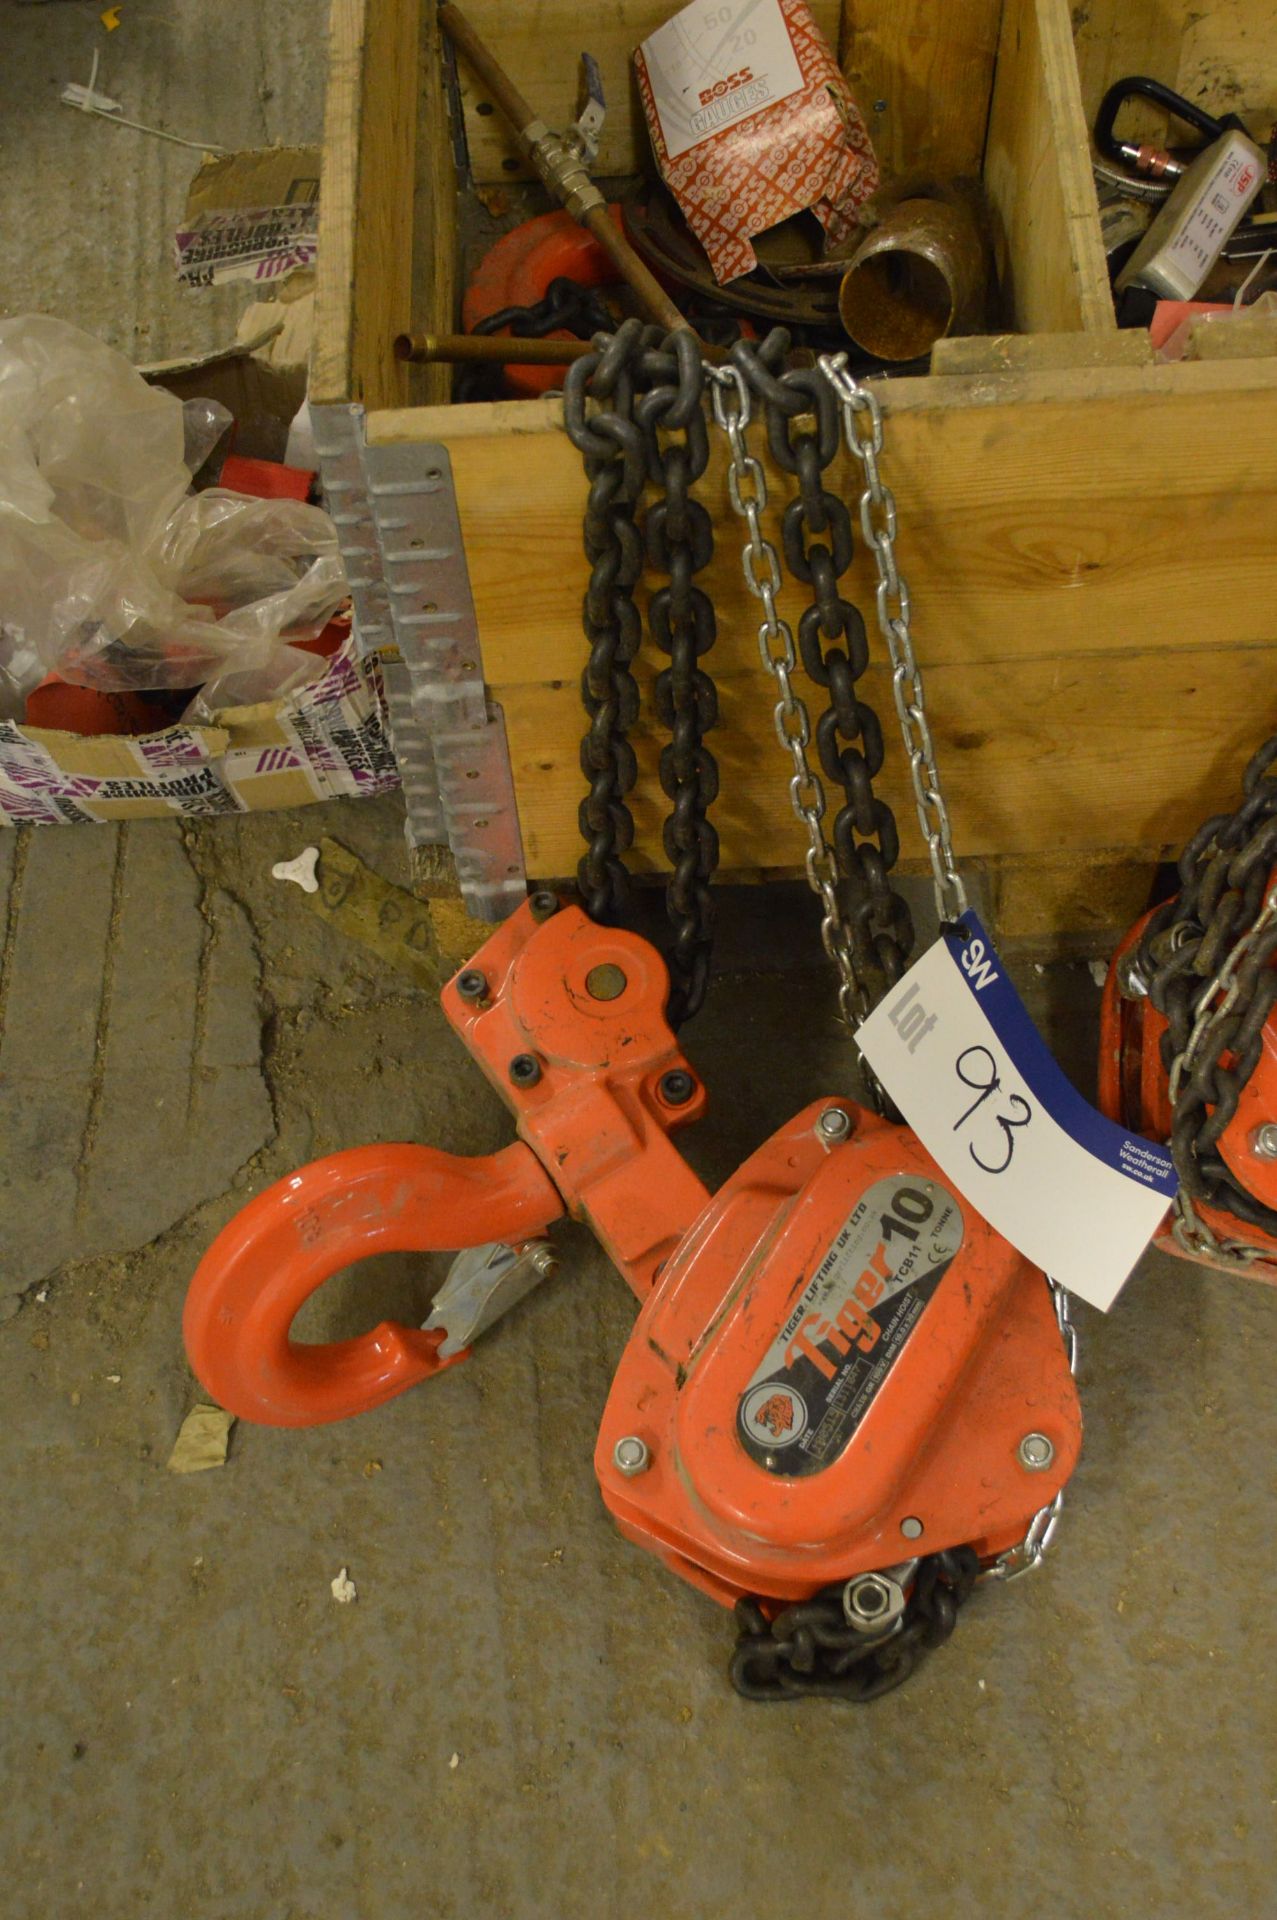 Tiger TCB11 10 Tonne Chain Hoist, serial no. 1311047, year of manufacture 2015, 10.0 x 30m